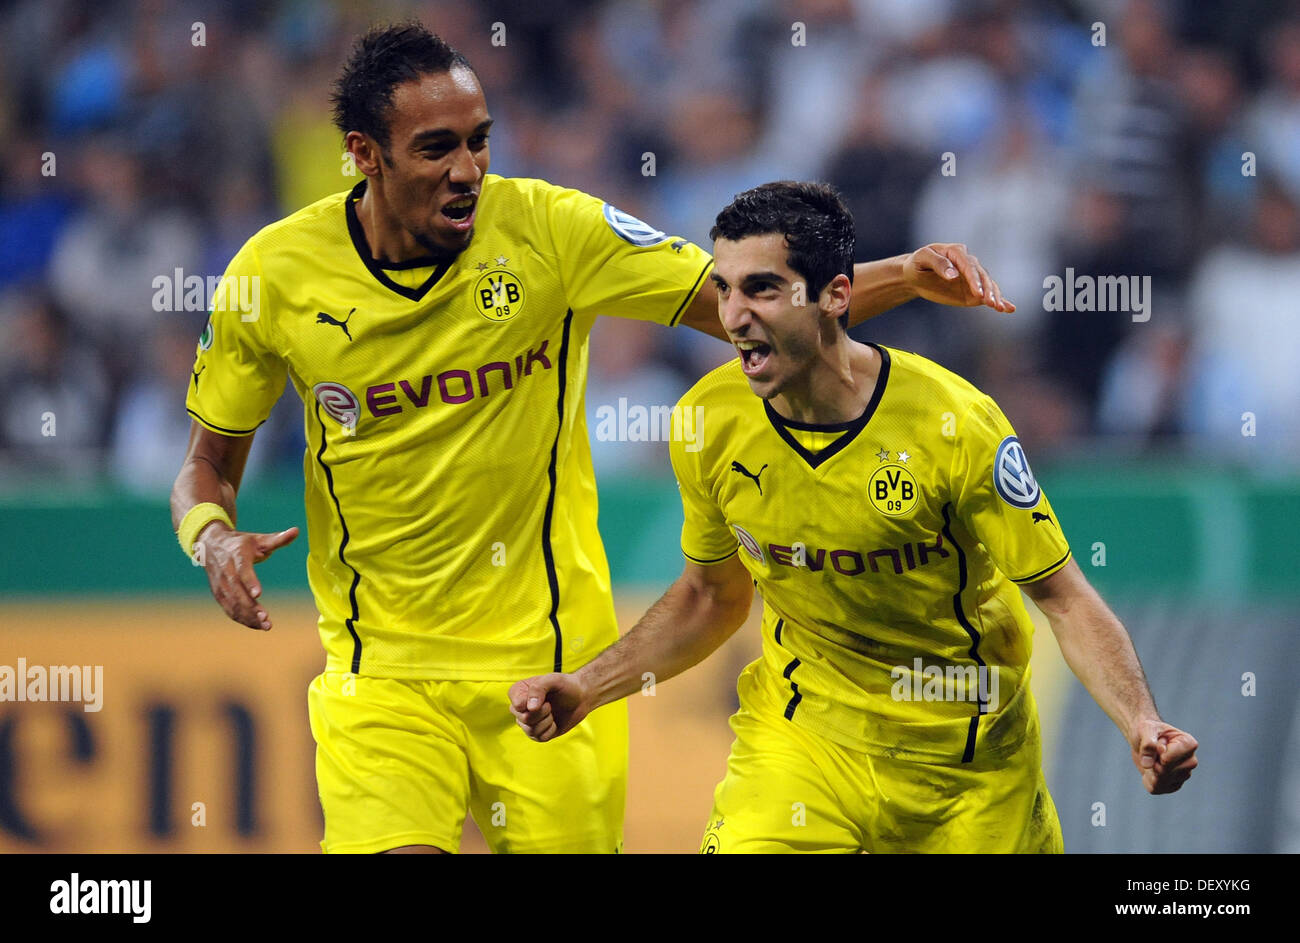 Munich, Germany. 24th Sep, 2013. Dortmund's Pierre-Emerick Aubameyang (L) and Henrich Mchitarjan celebrate the 2-0 goal during the DFB Cup second round match between TSV 1860 Munich and Borussia Dortmund at Allianz Arena in Munich, Germany, 24 September 2013. Photo: ANDREAS GEBERT/dpa/Alamy Live News Stock Photo